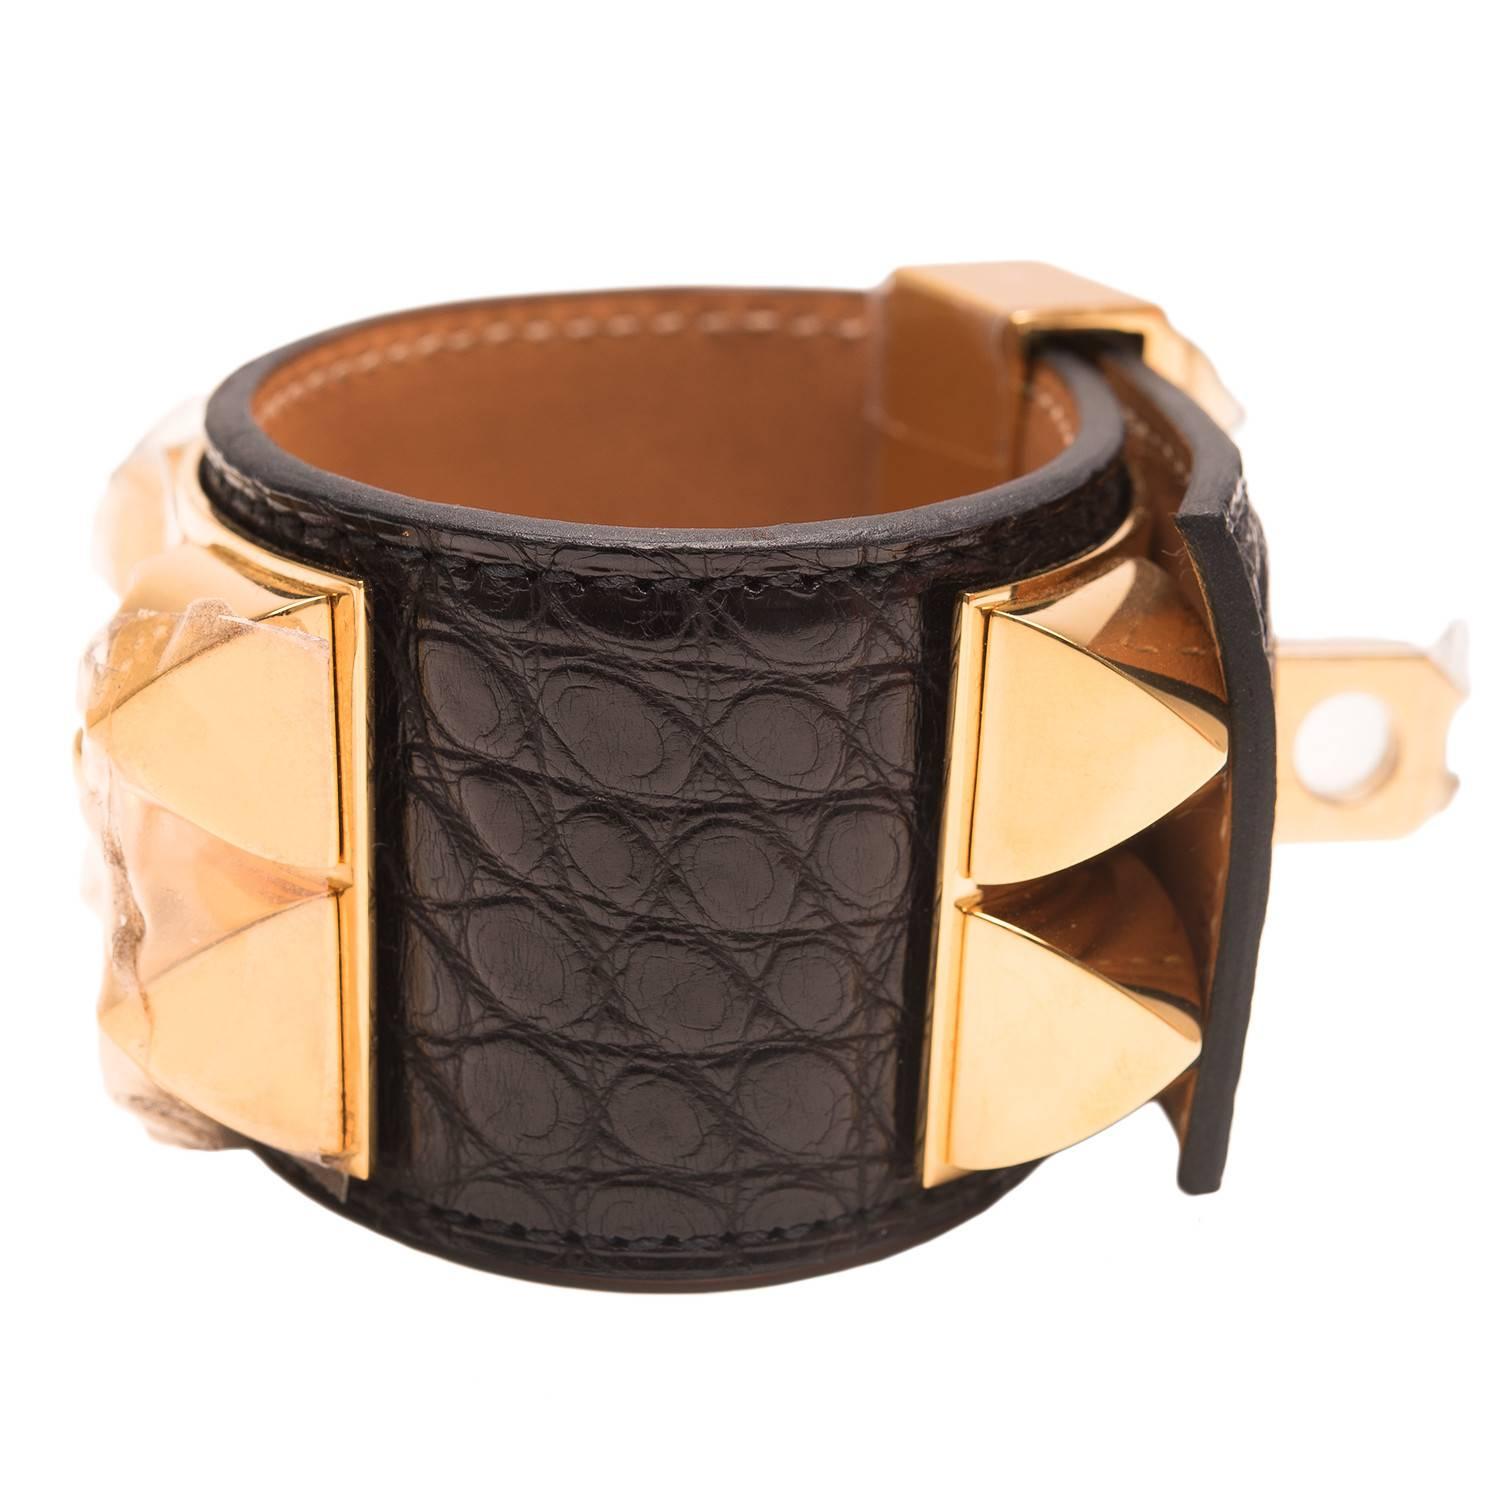 Hermes Collier de Chien (CDC) in Black alligator with gold plated hardware in size small.

This style features gold pyramid studs, center ring and adjustable push lock closure.

Collection: O Square

Origin: France

Condition: Pristine,